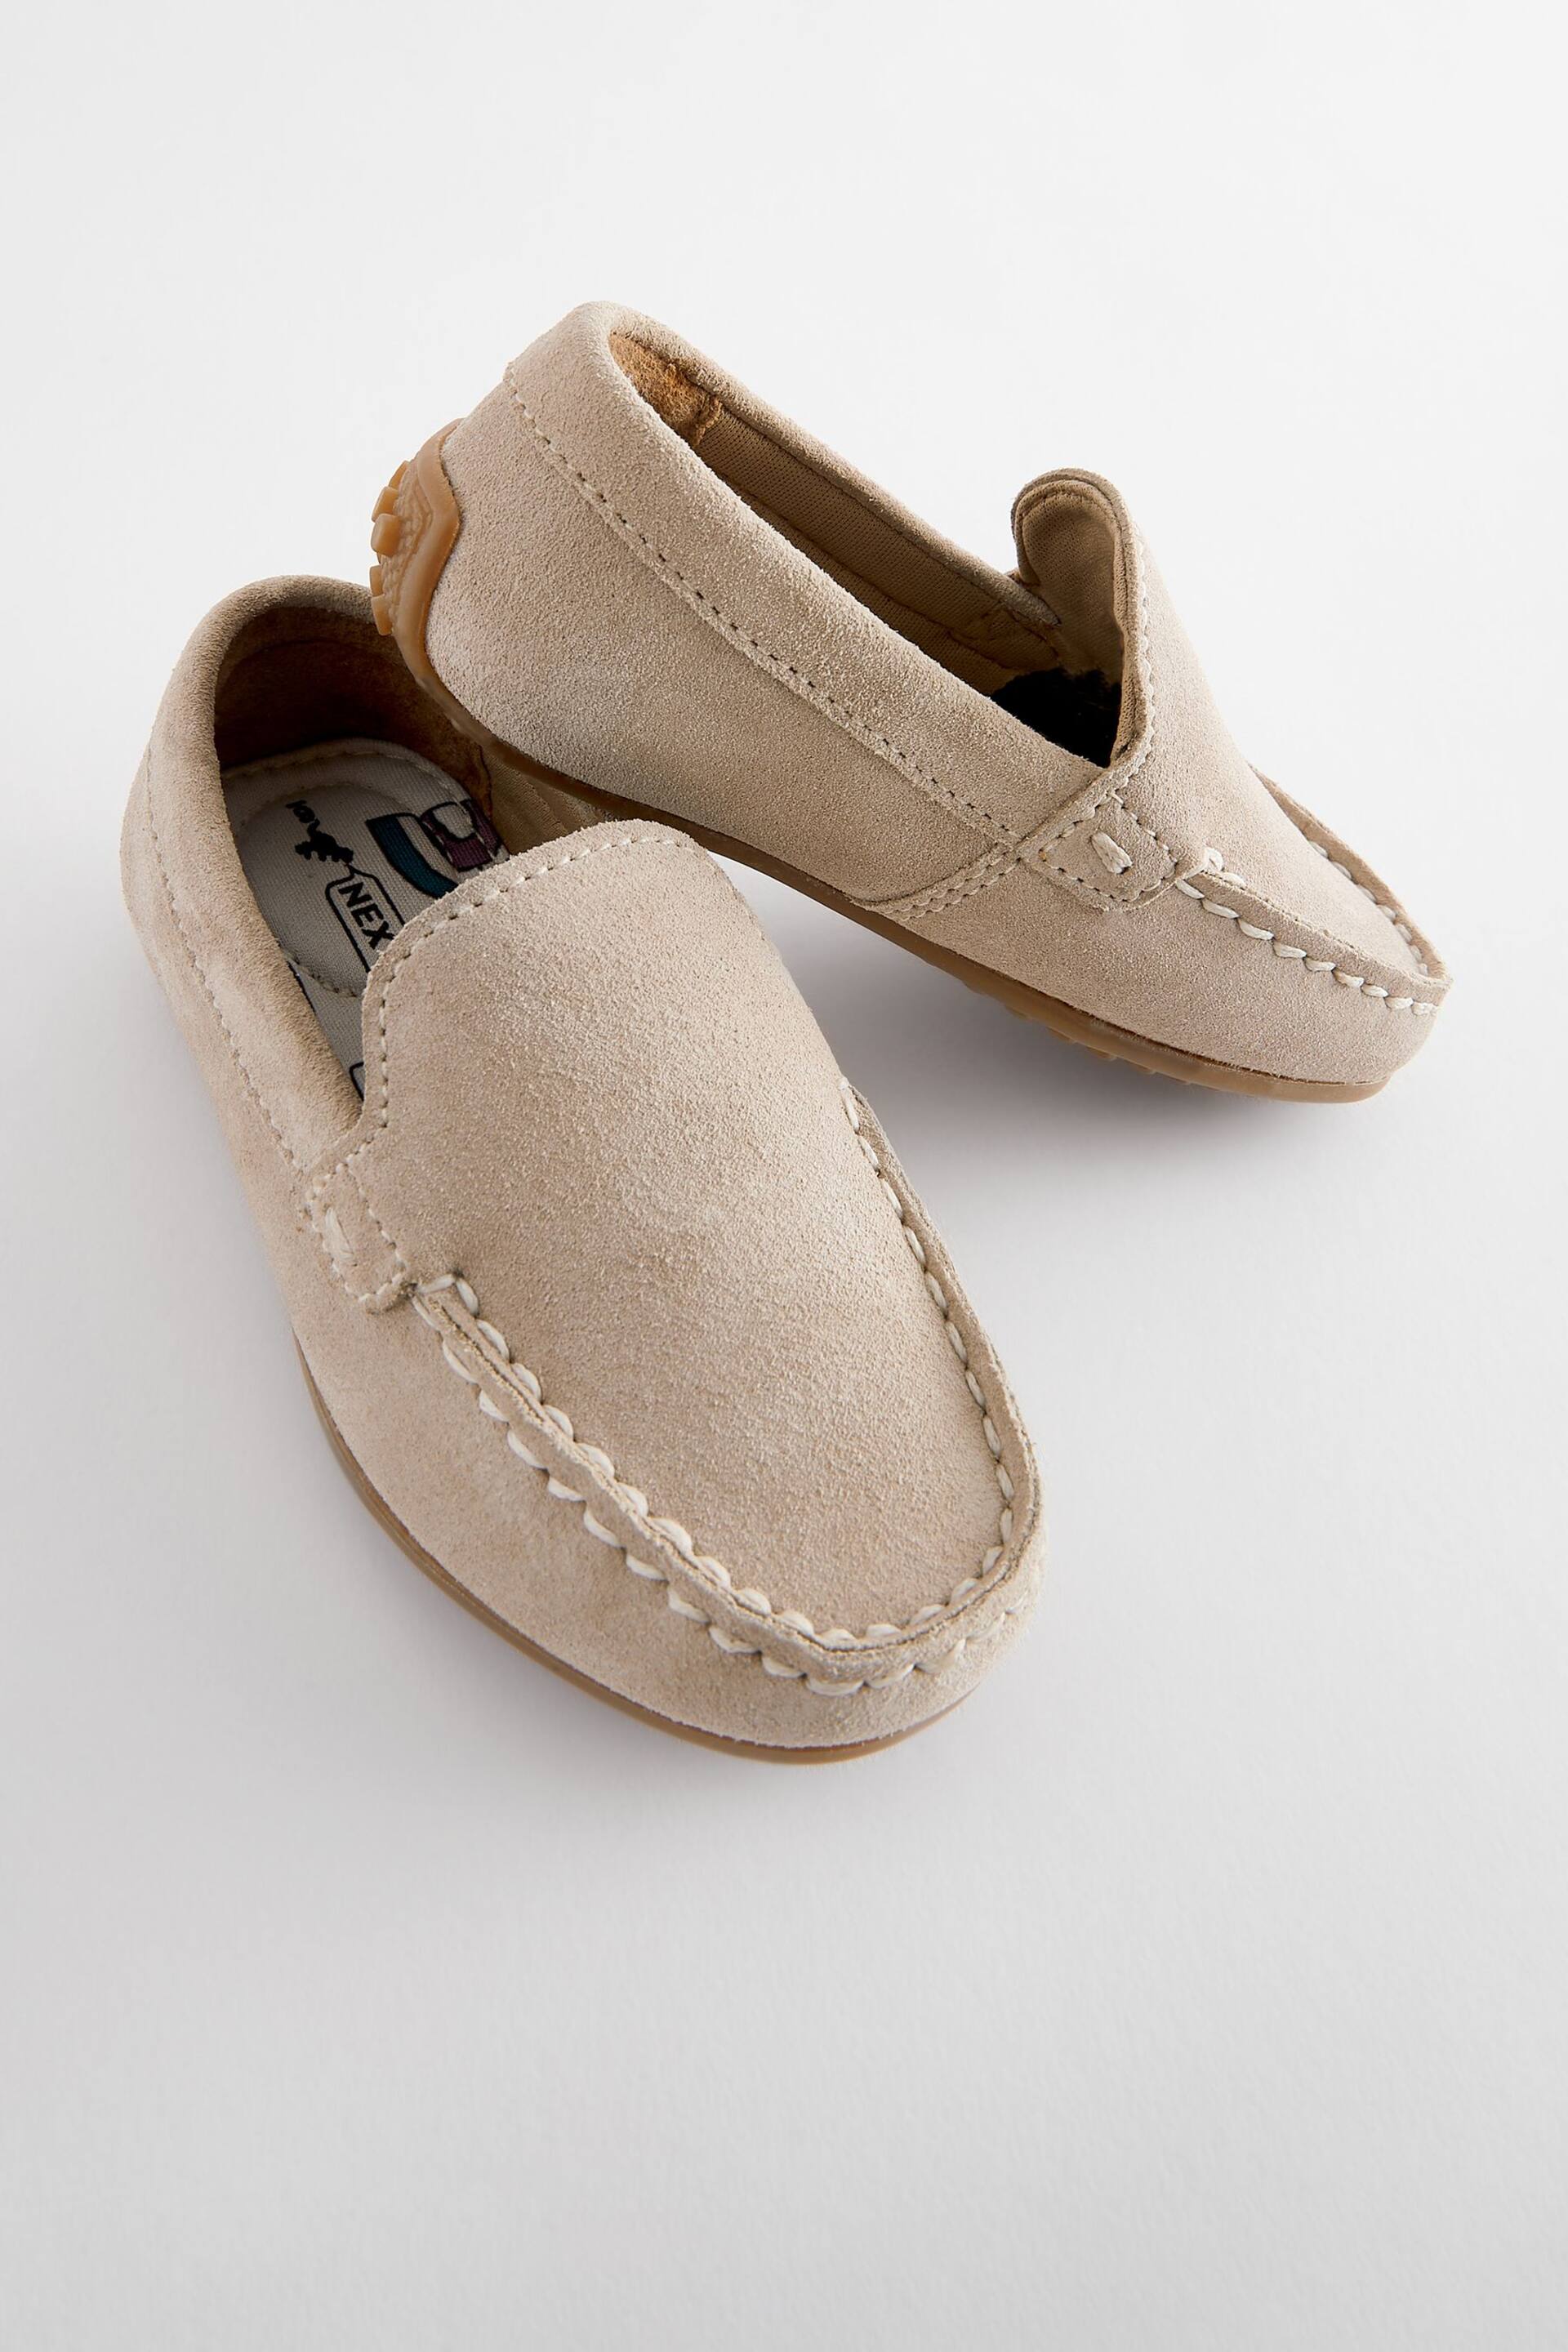 Natural Stone Driver Shoes - Image 4 of 5